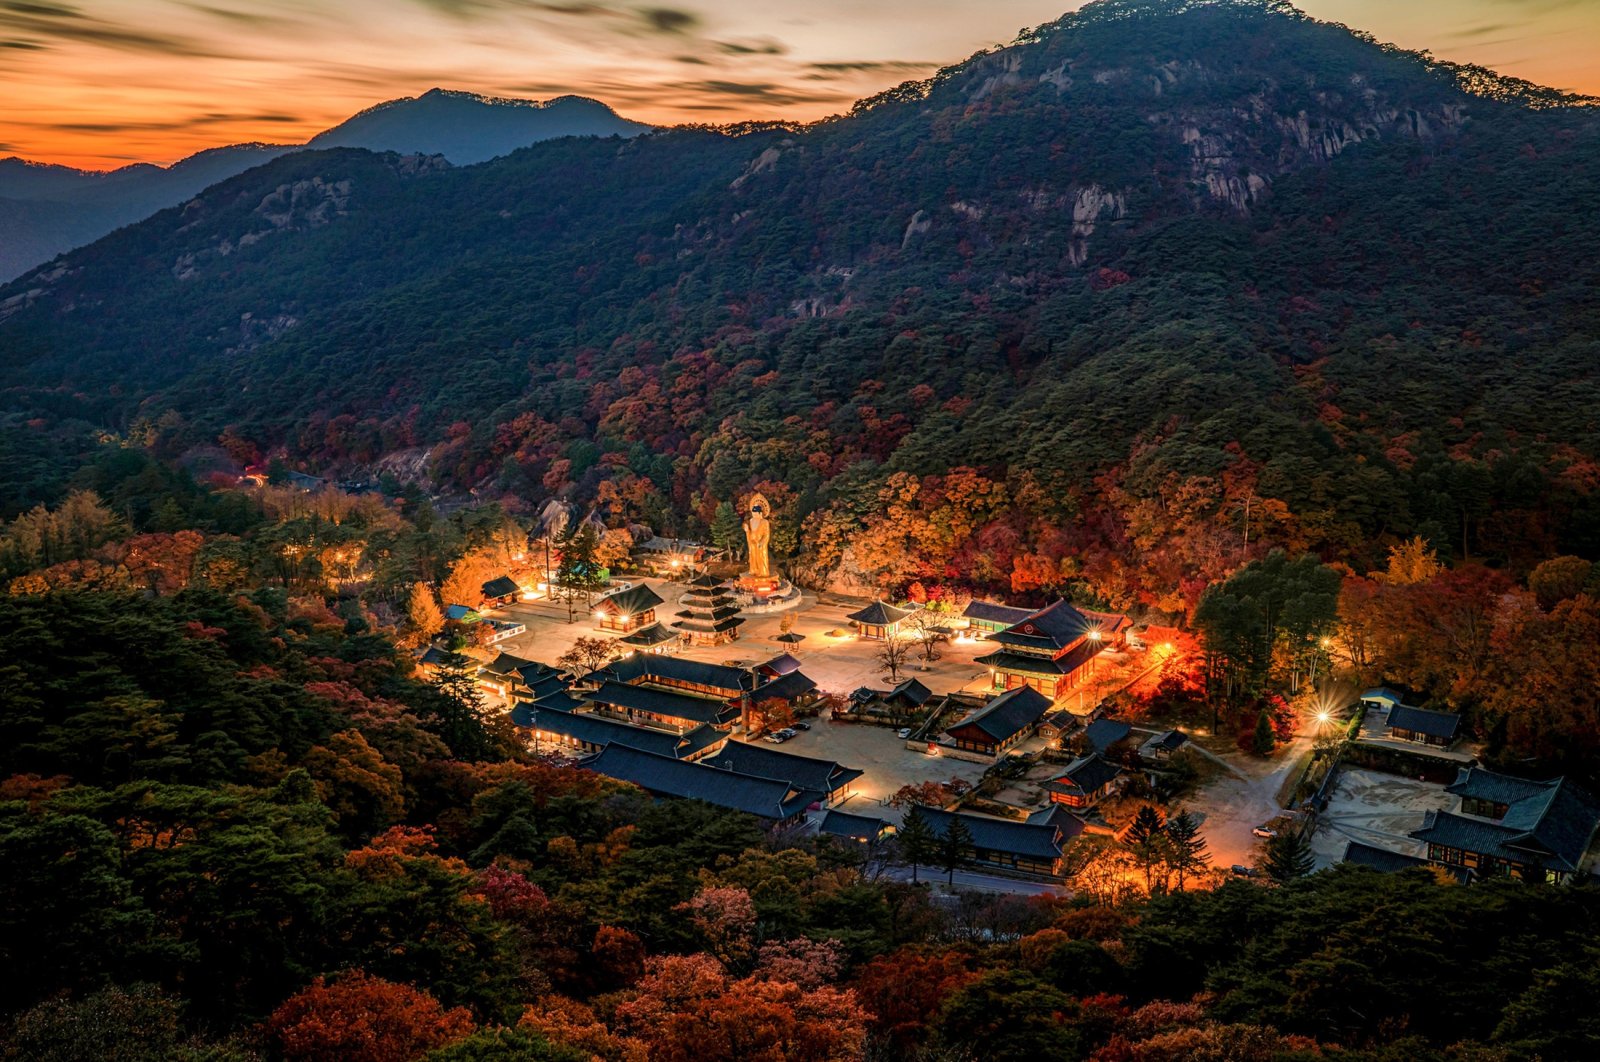 Taking a few days off to wind down at a Buddhist temple in South Korea promises to be a very special experience. (Korea Tourism Organization via dpa)